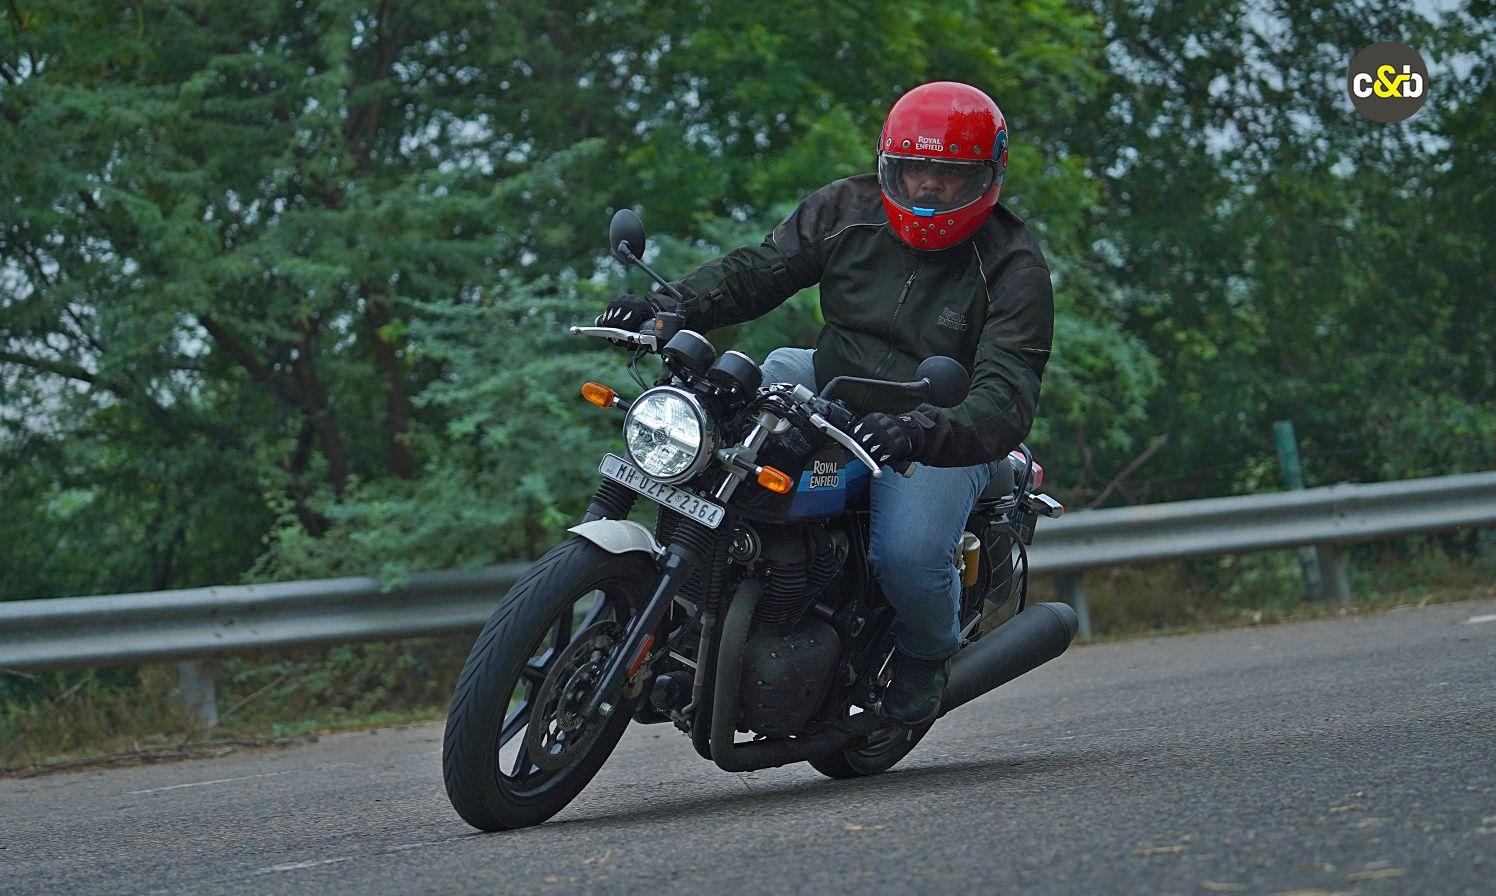 The Royal Enfield Continental GT 650 has been updated significantly for 2023 and we spent some time with the motorcycle to sample the changes and see how much value they add to the bike. 